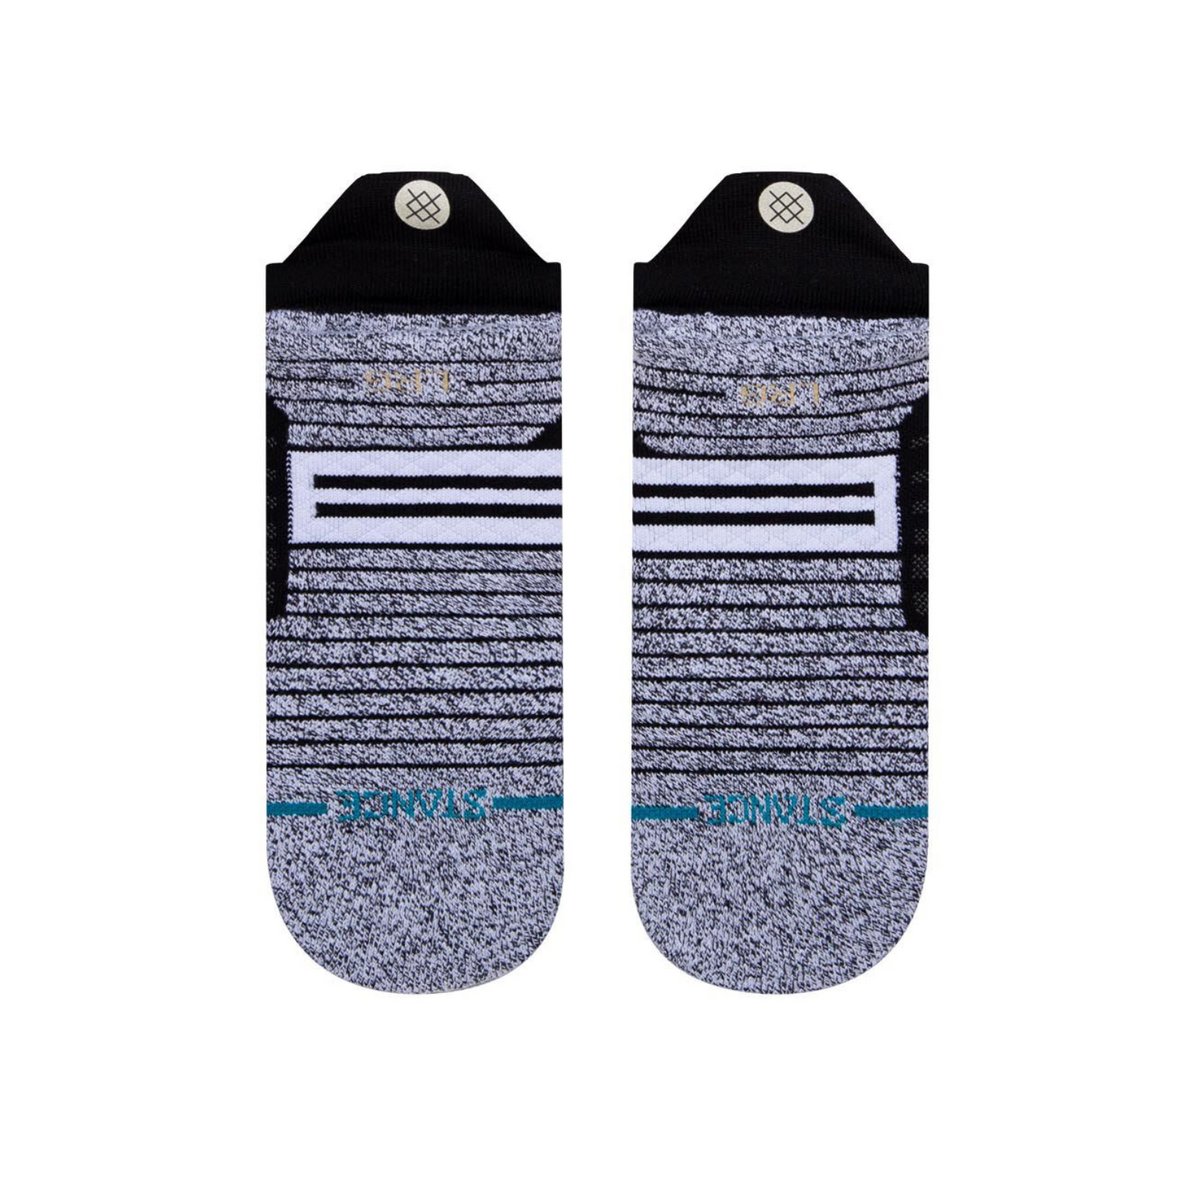 Stance Versa Tab women&#39;s and men&#39;s sock featuring black no-show sock with gray bottom. Shown on display feet from bottom. 